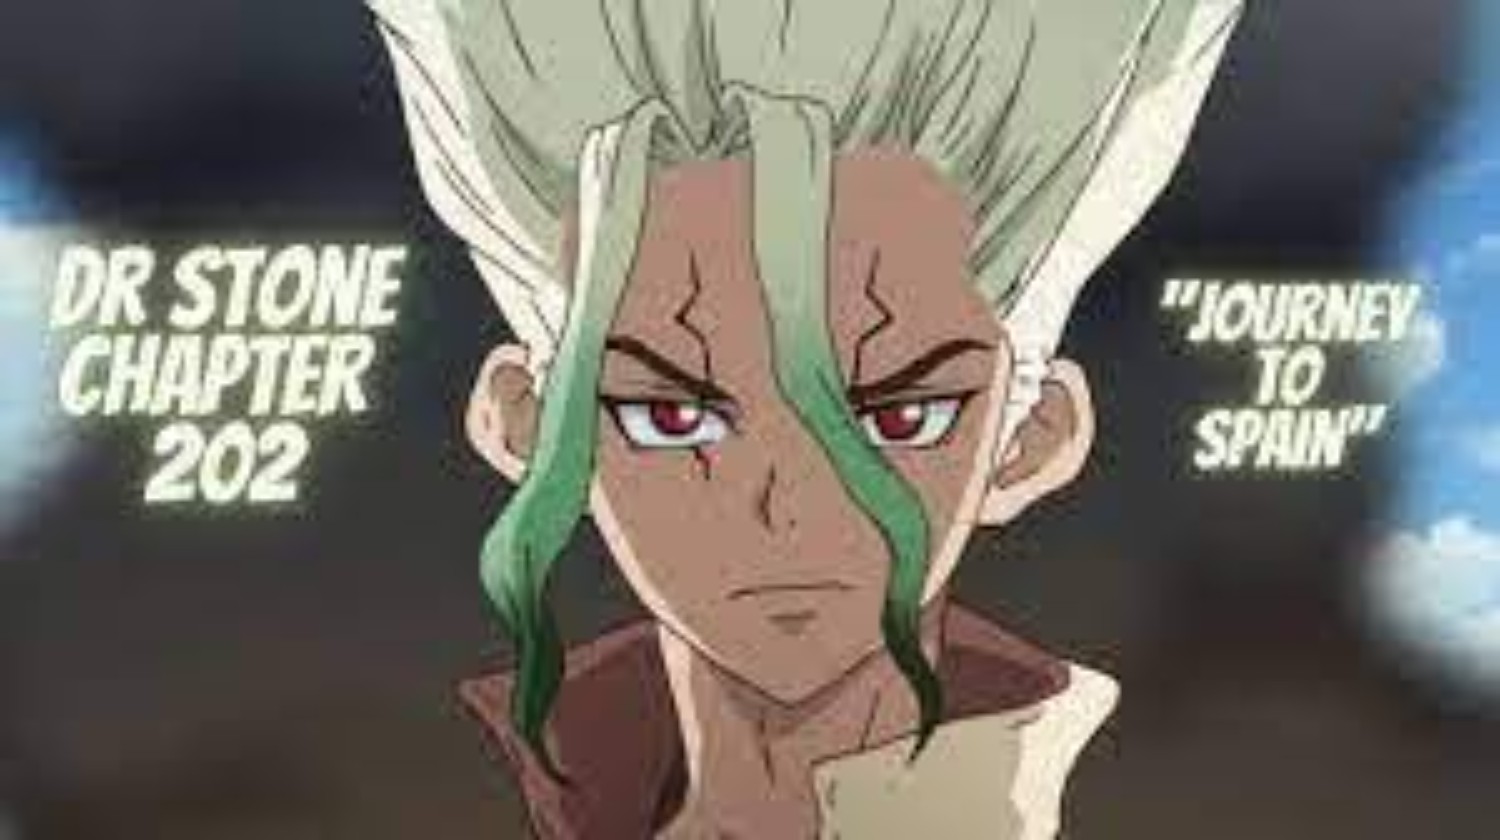 Dr. Stone Chapter 202 Release Date, Plot, Discussion, And Read Online